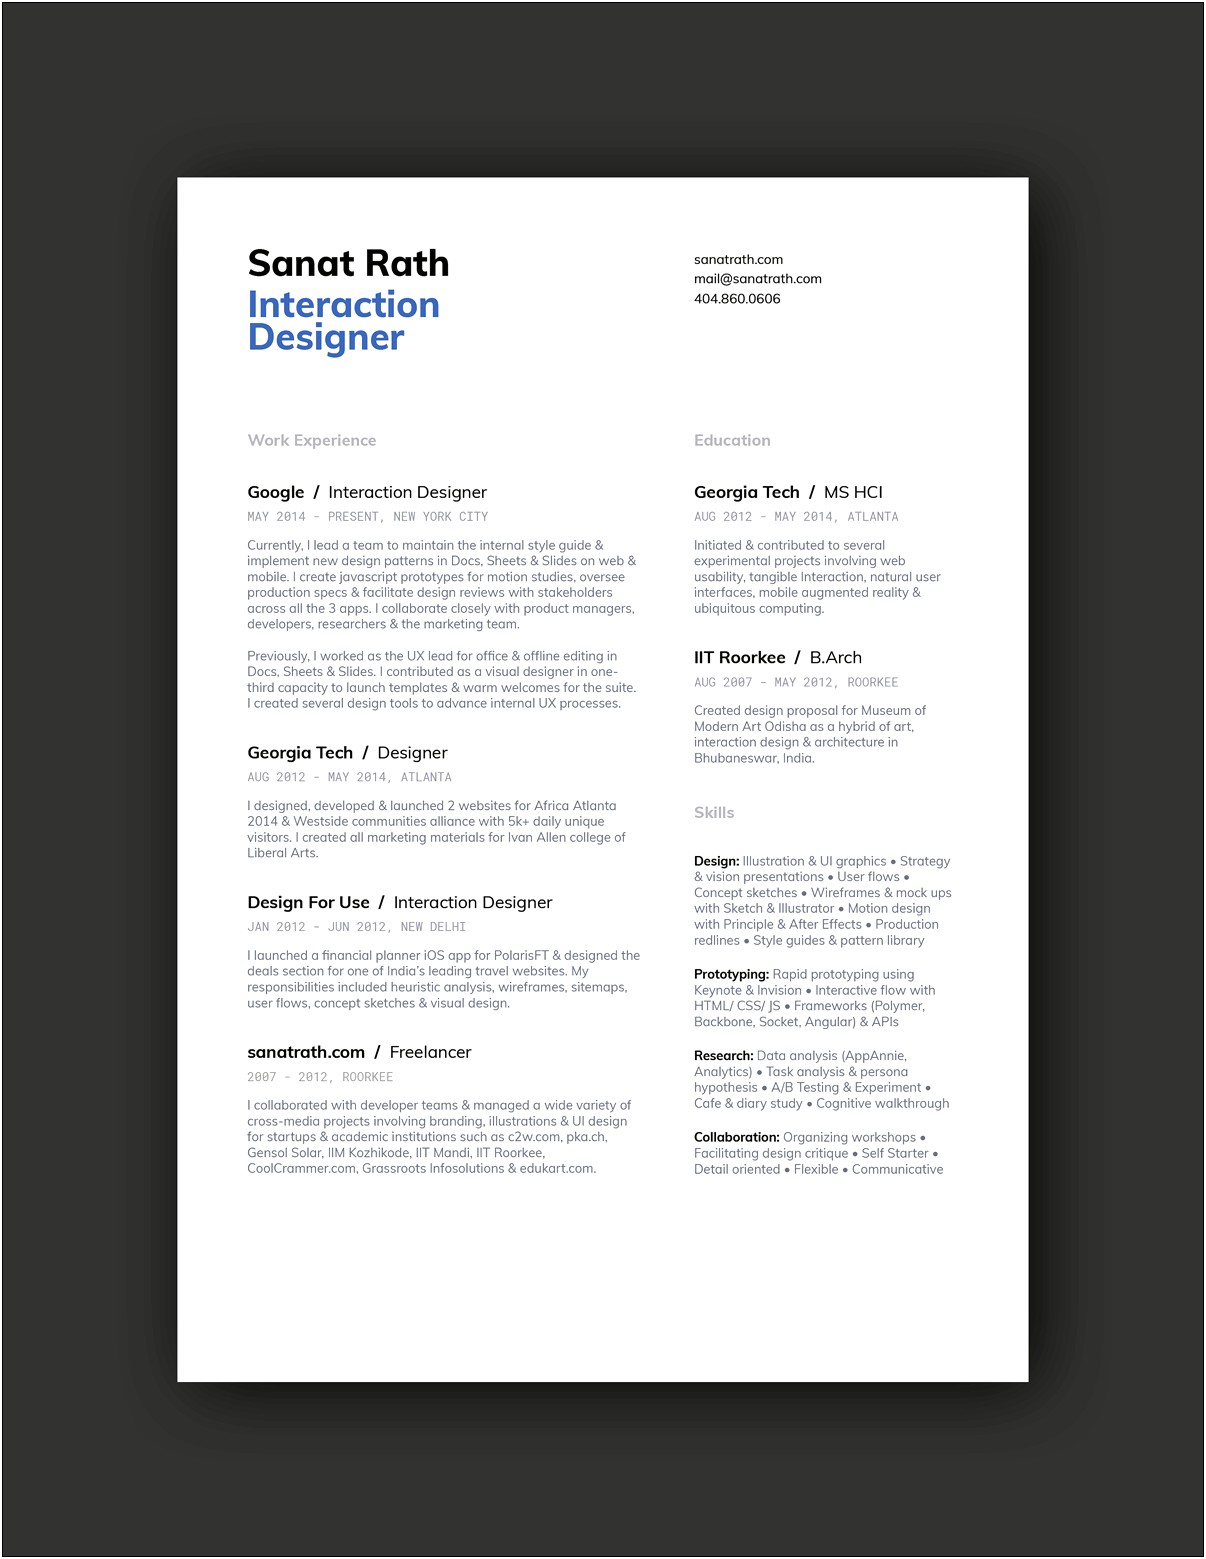 Using Resume Templates For Motion Graphics Jobs